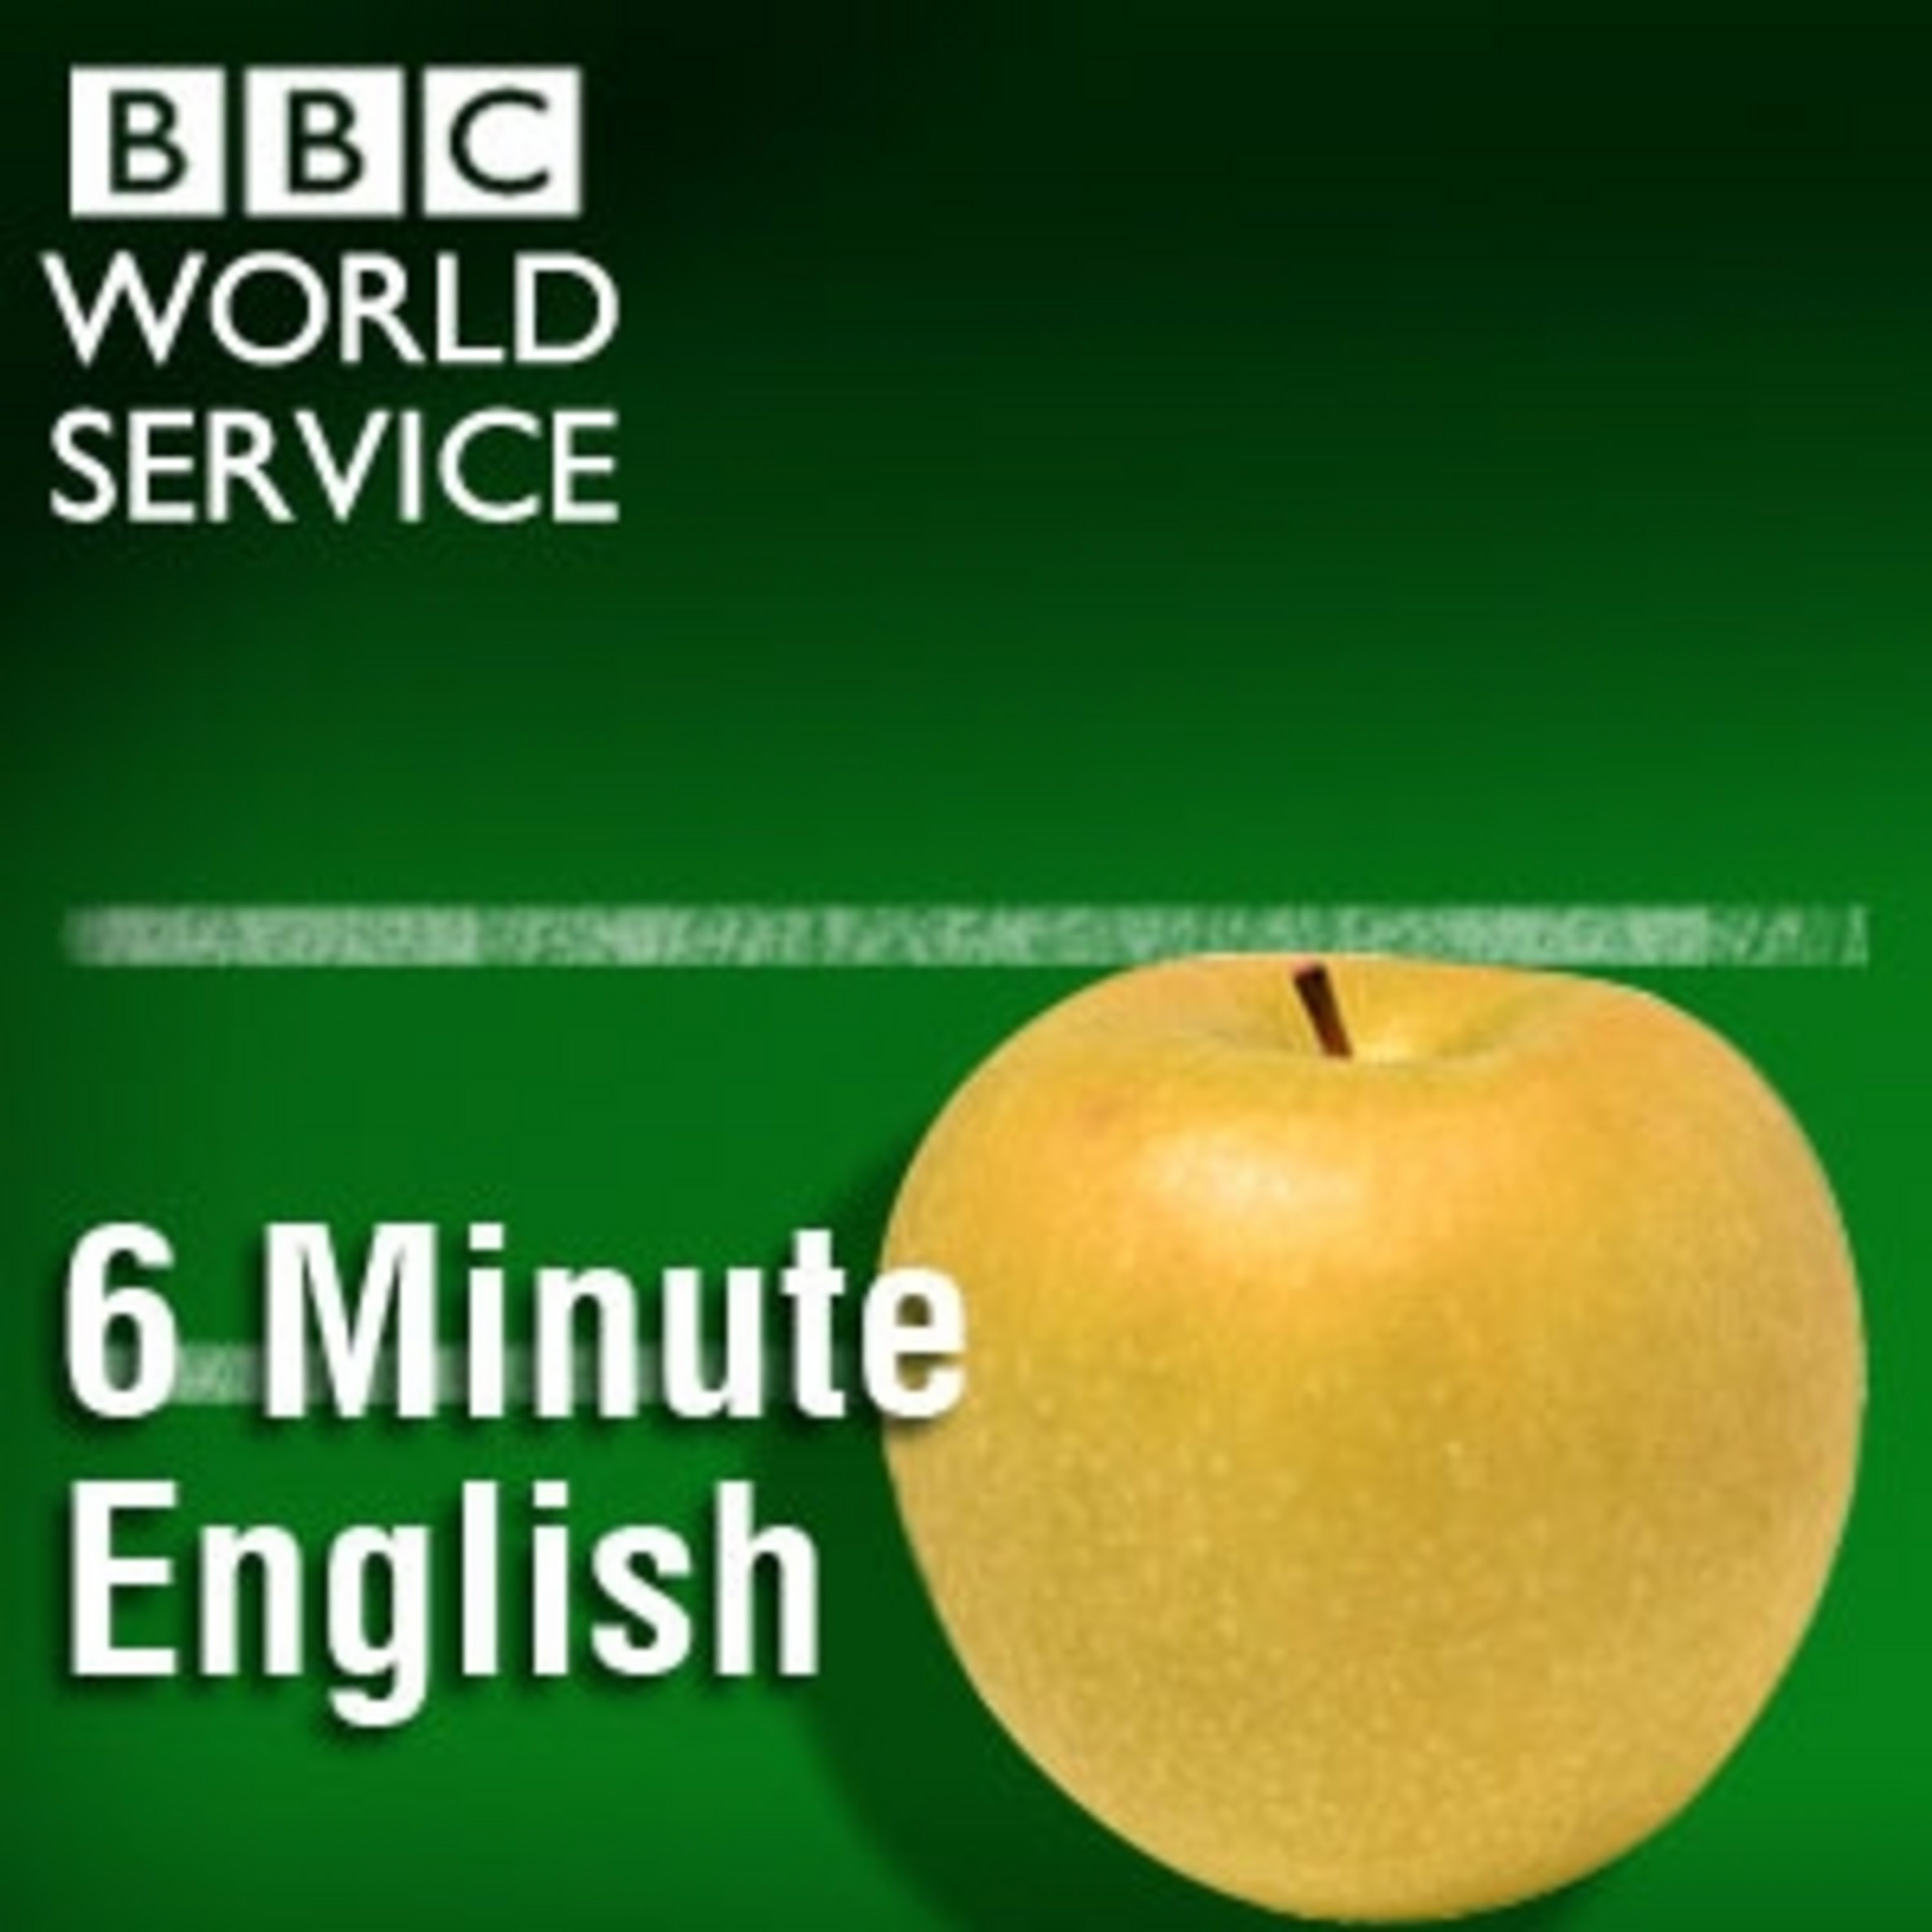 Minute English (podcast)